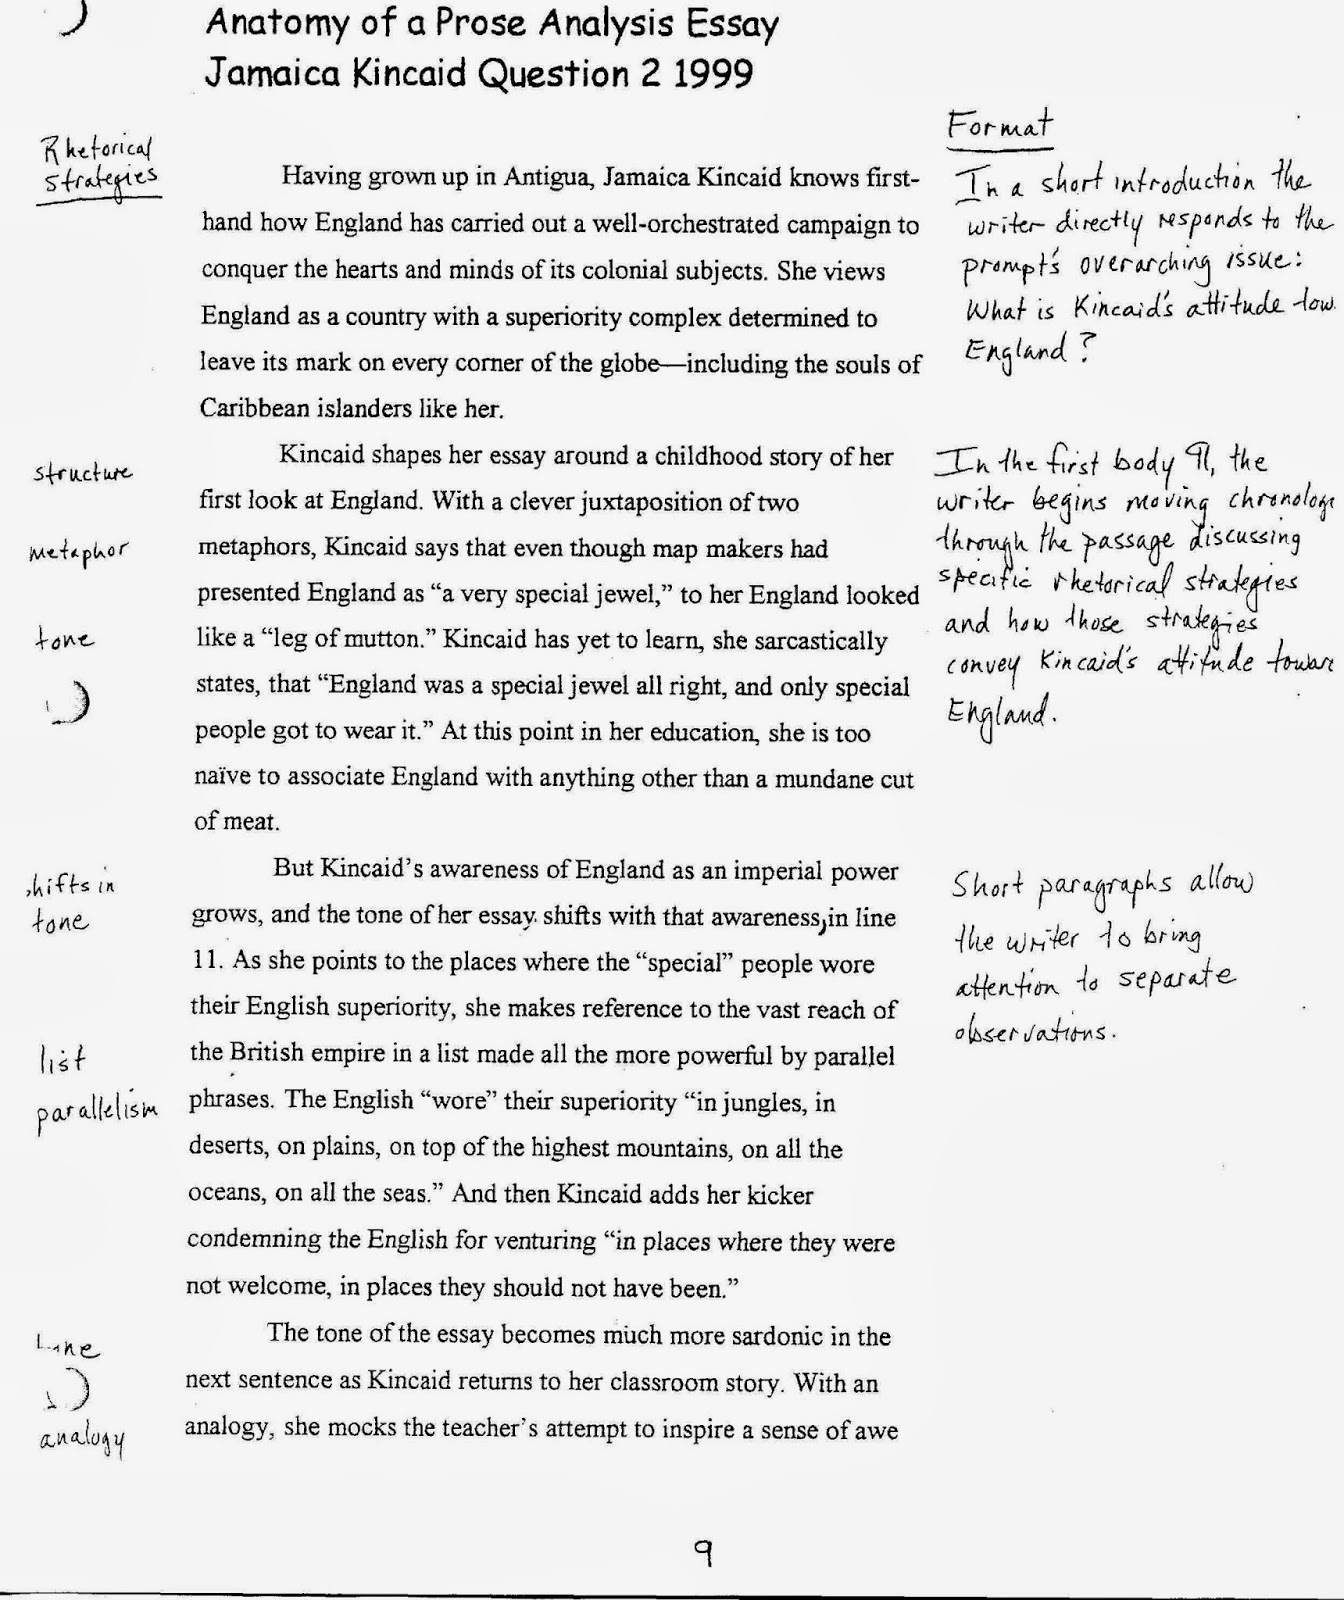 How to write a conclusion for a comparison and contrast essay